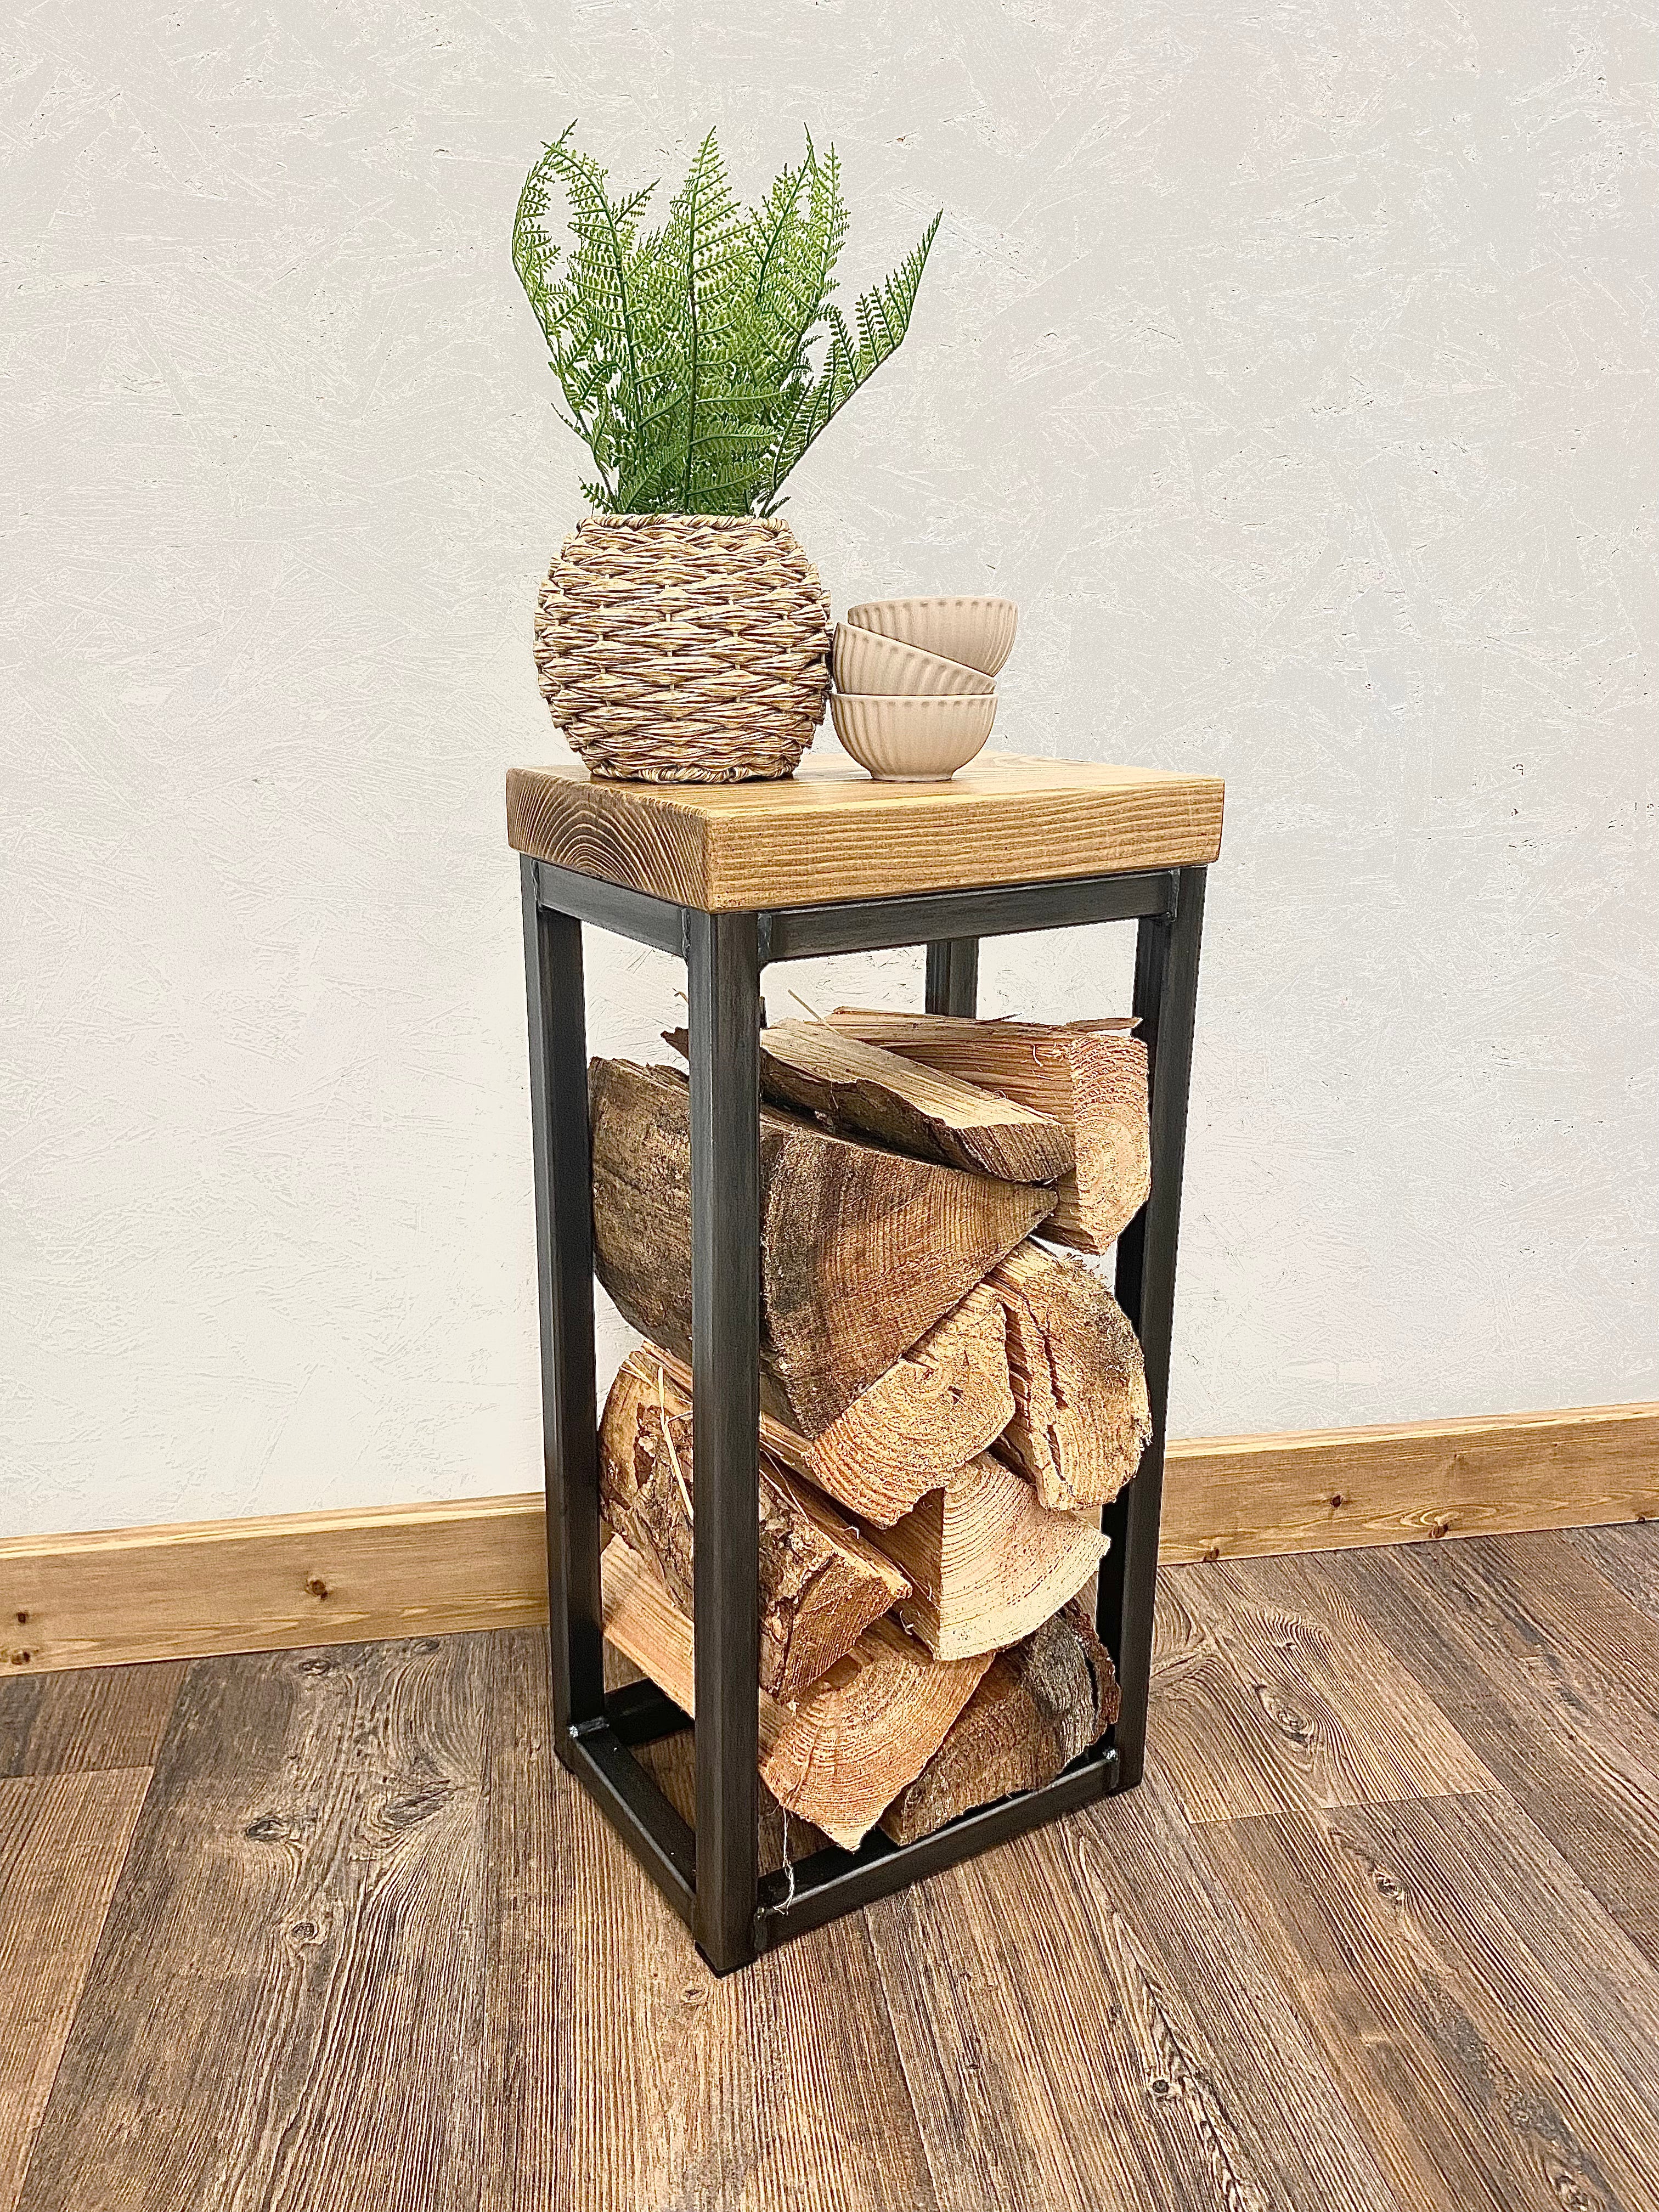 Rustic log holder table - Log store - side table Smallest side table FREE DELIVERY   